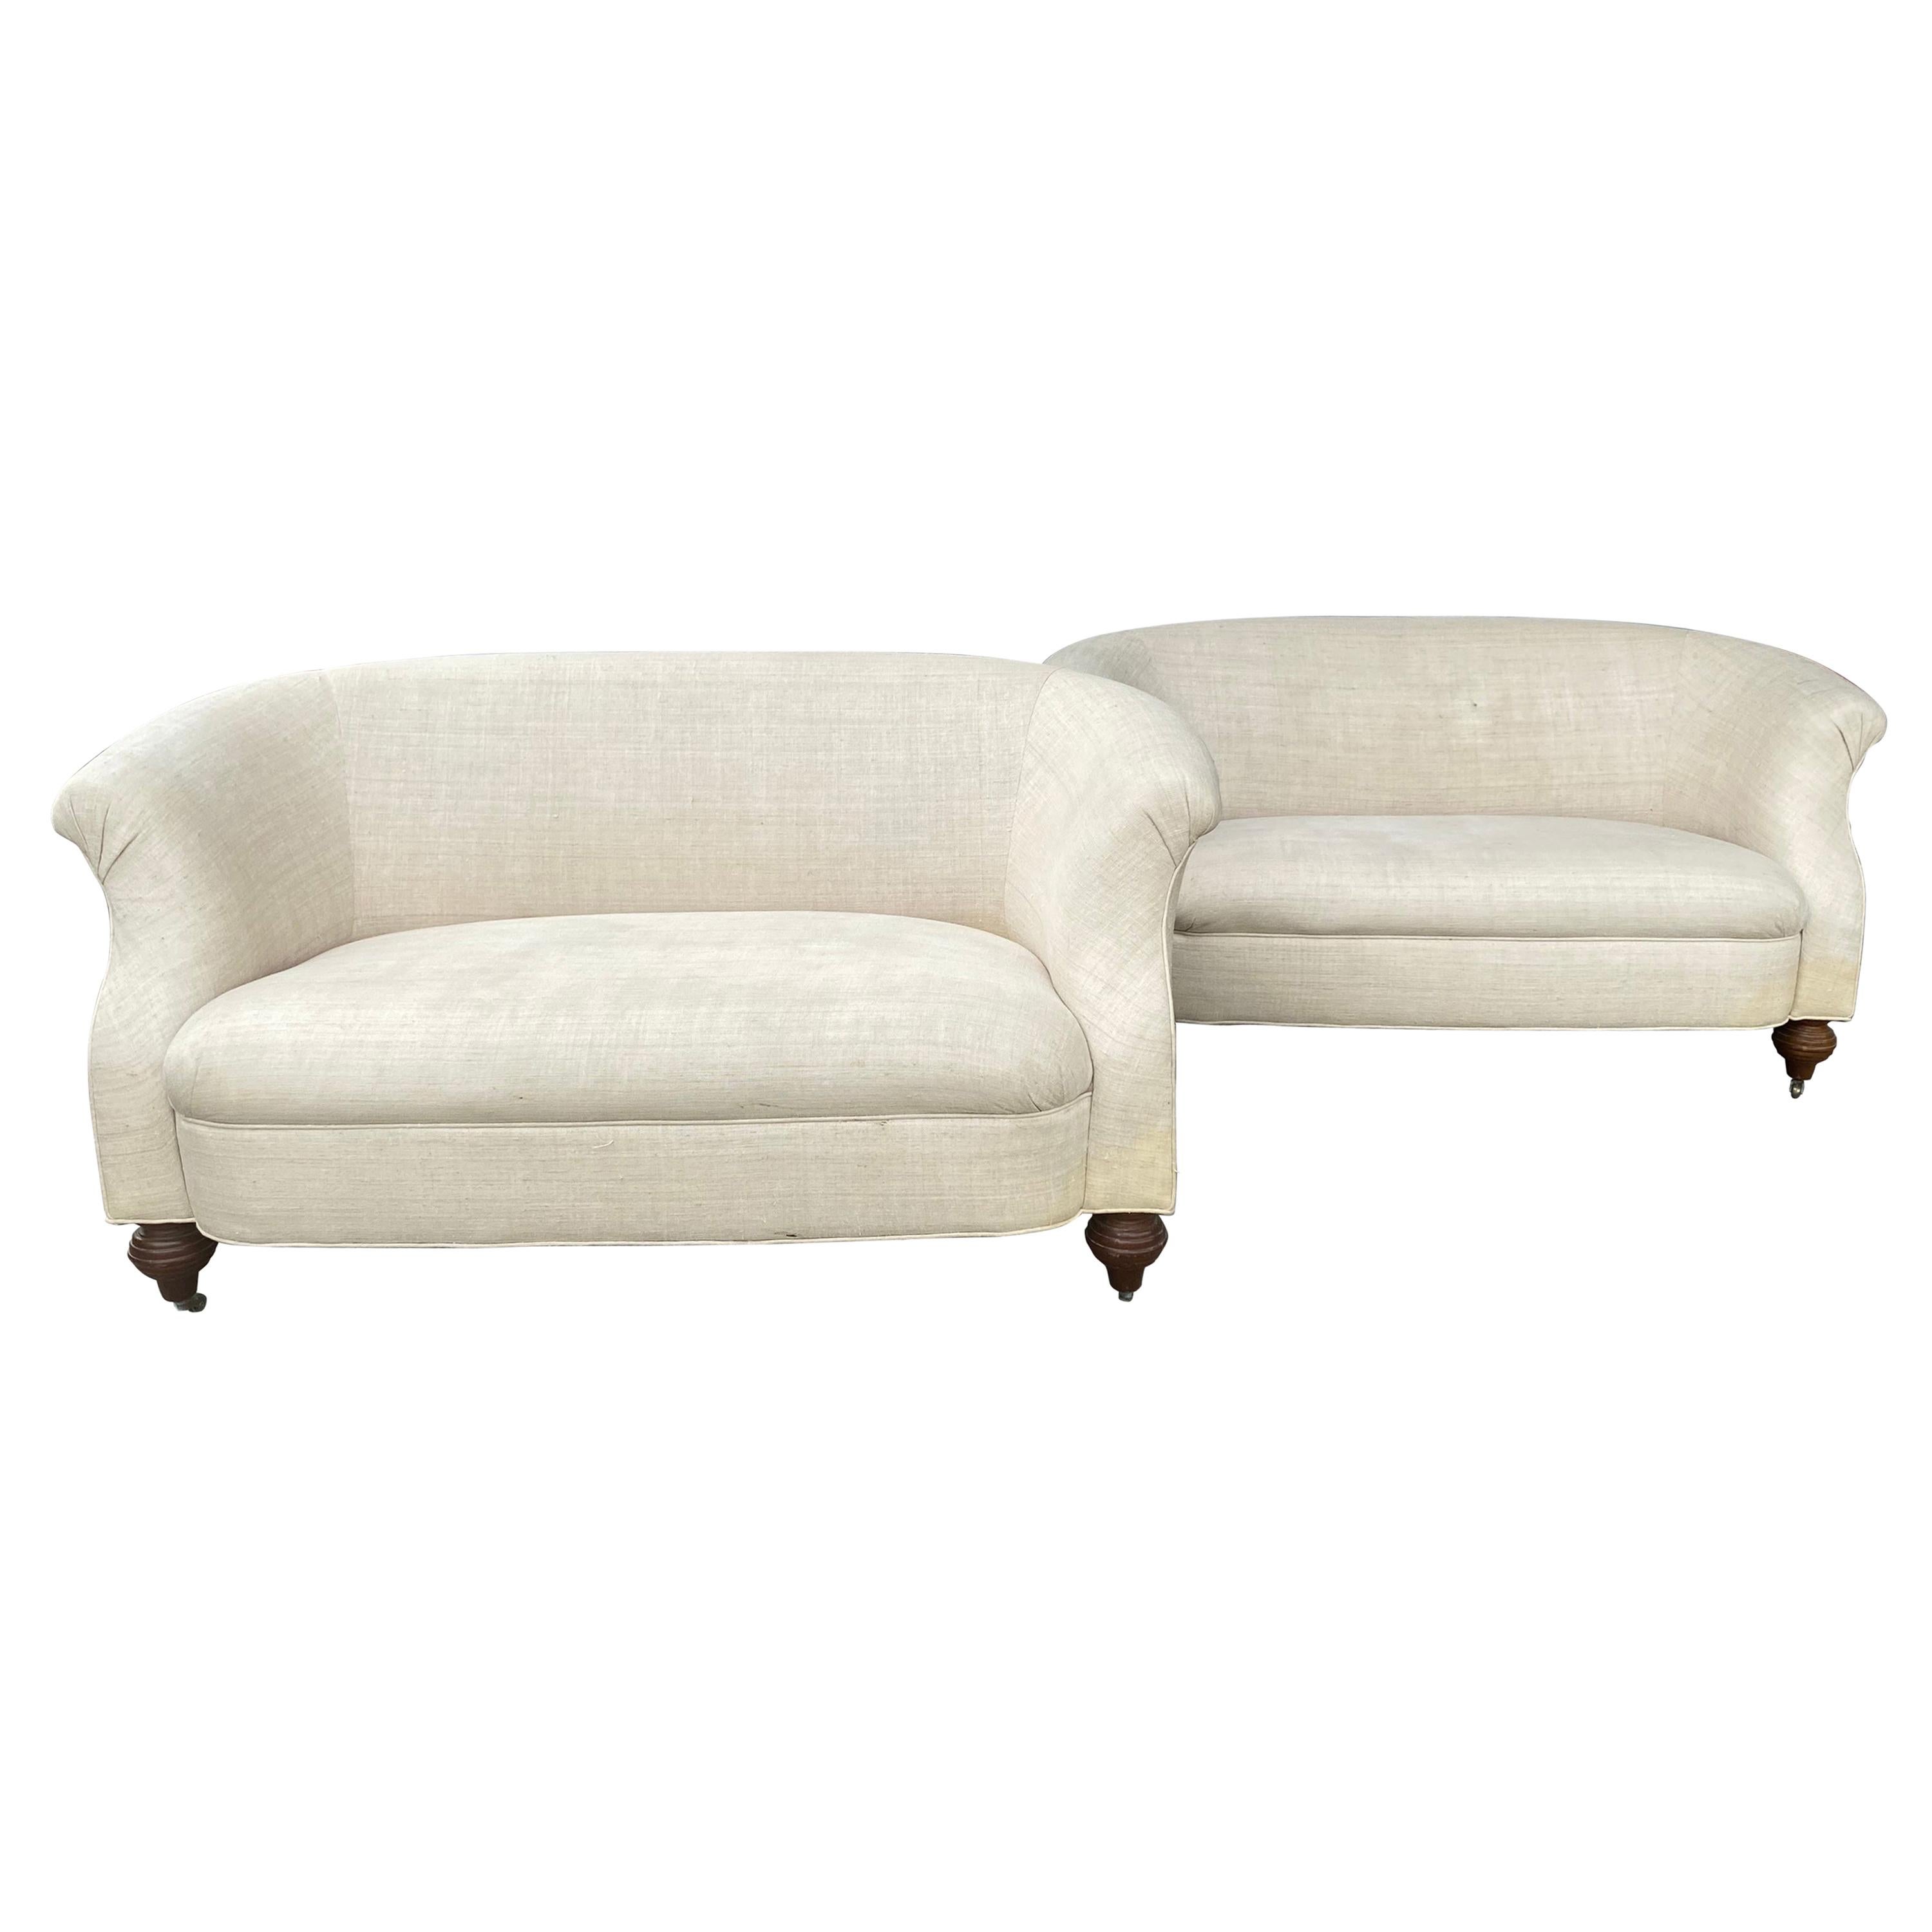 Wonderful Matched Pair of Victorian Style Sette's, Loveseats, circa 1930s